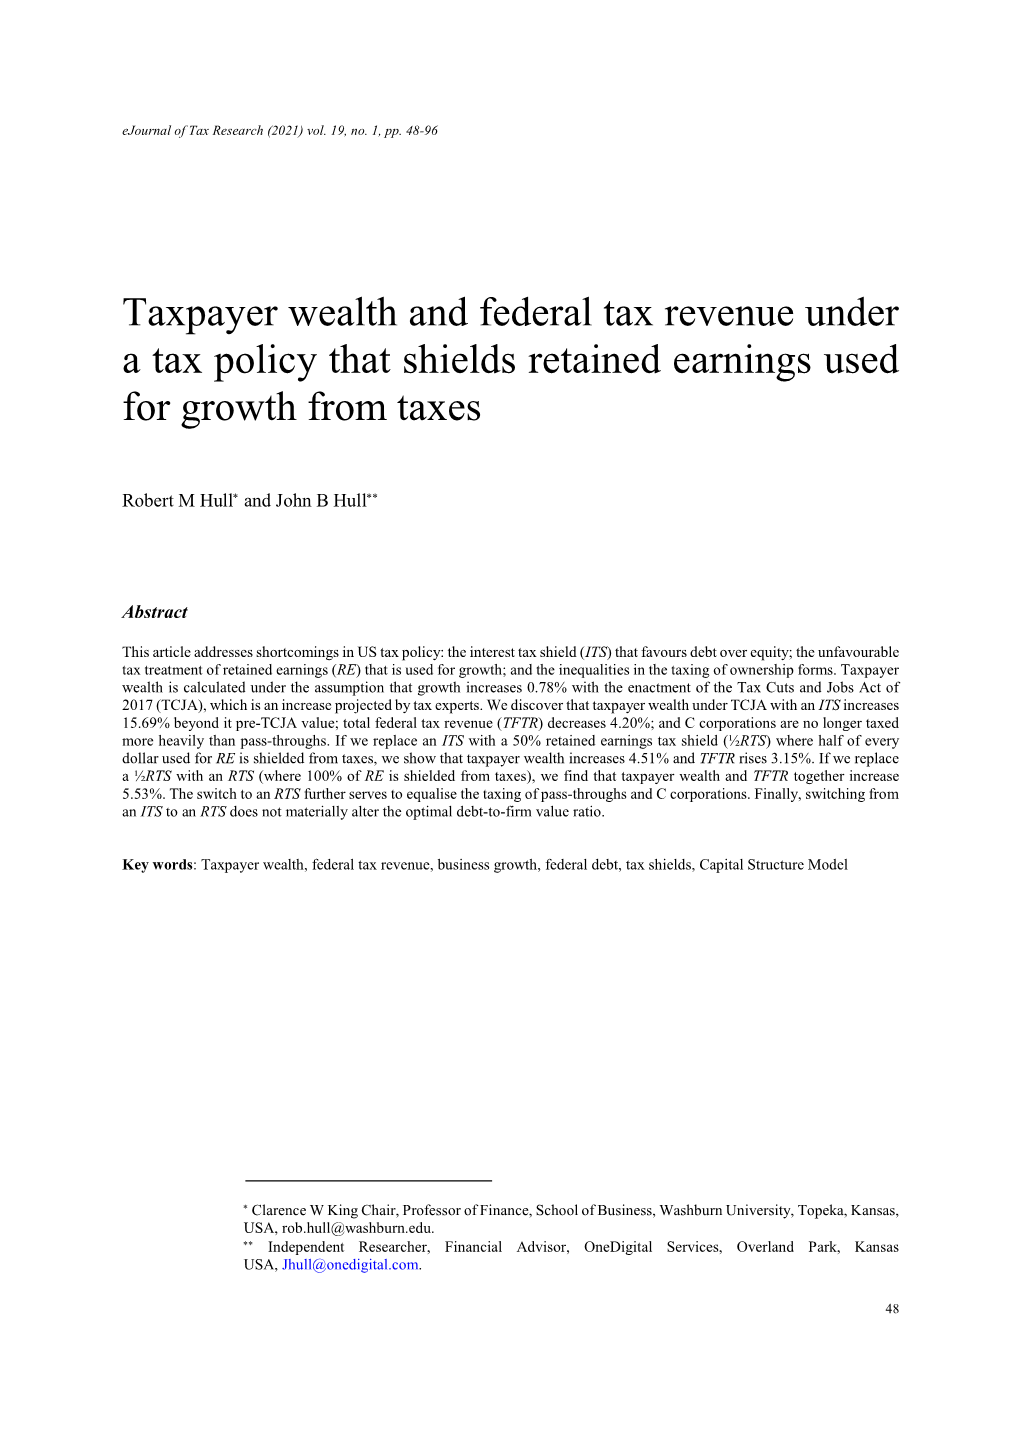 Taxpayer Wealth and Federal Tax Revenue Under a Tax Policy That Shields Retained Earnings Used for Growth from Taxes